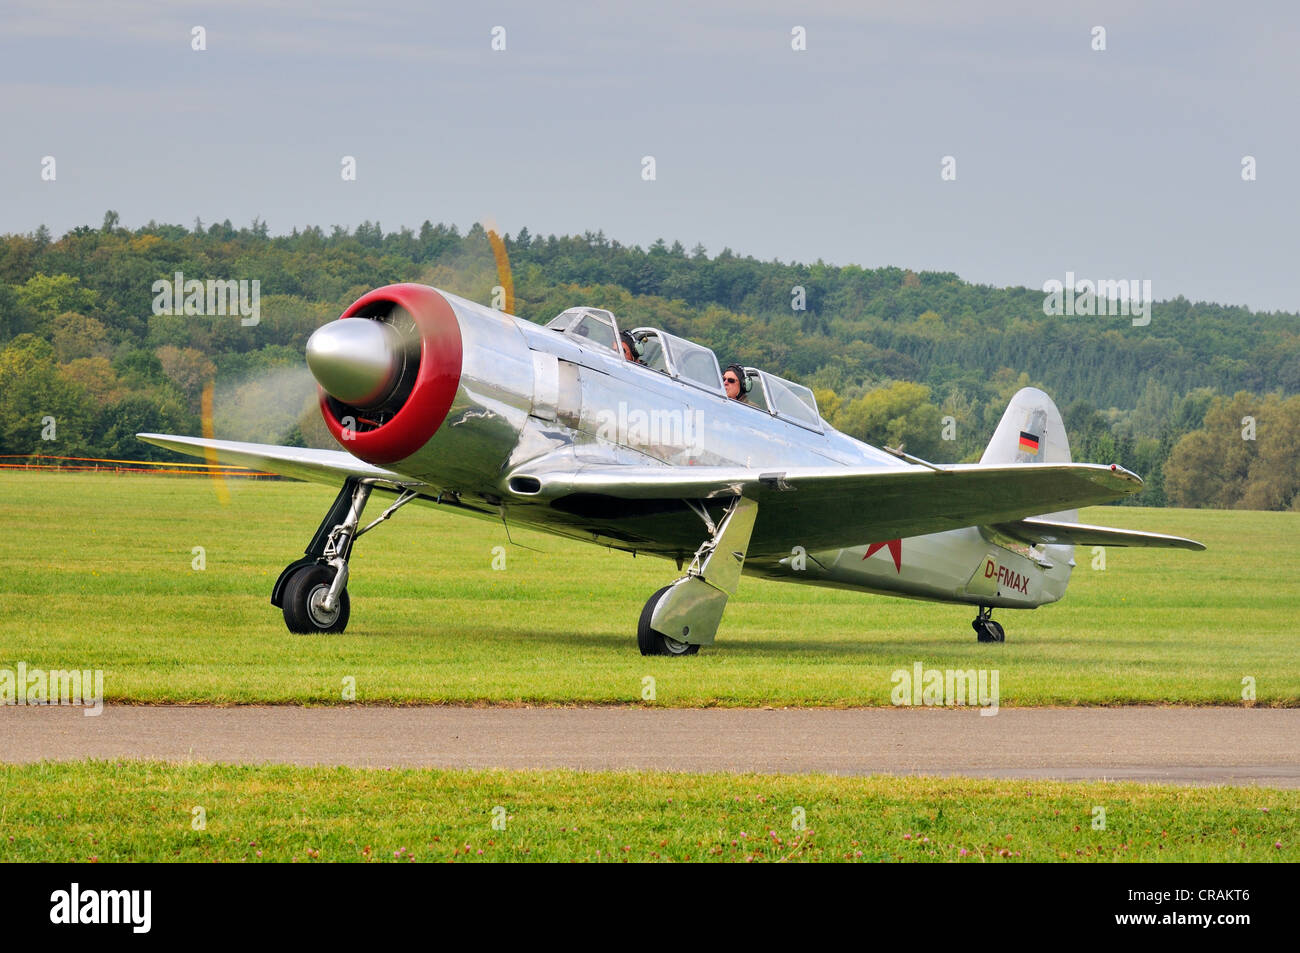 Yakovlev Yak-11, Soviet fighter plane produced from 1946 to 1956, Europe's largest meeting of vintage aircraft at Hahnweide Stock Photo